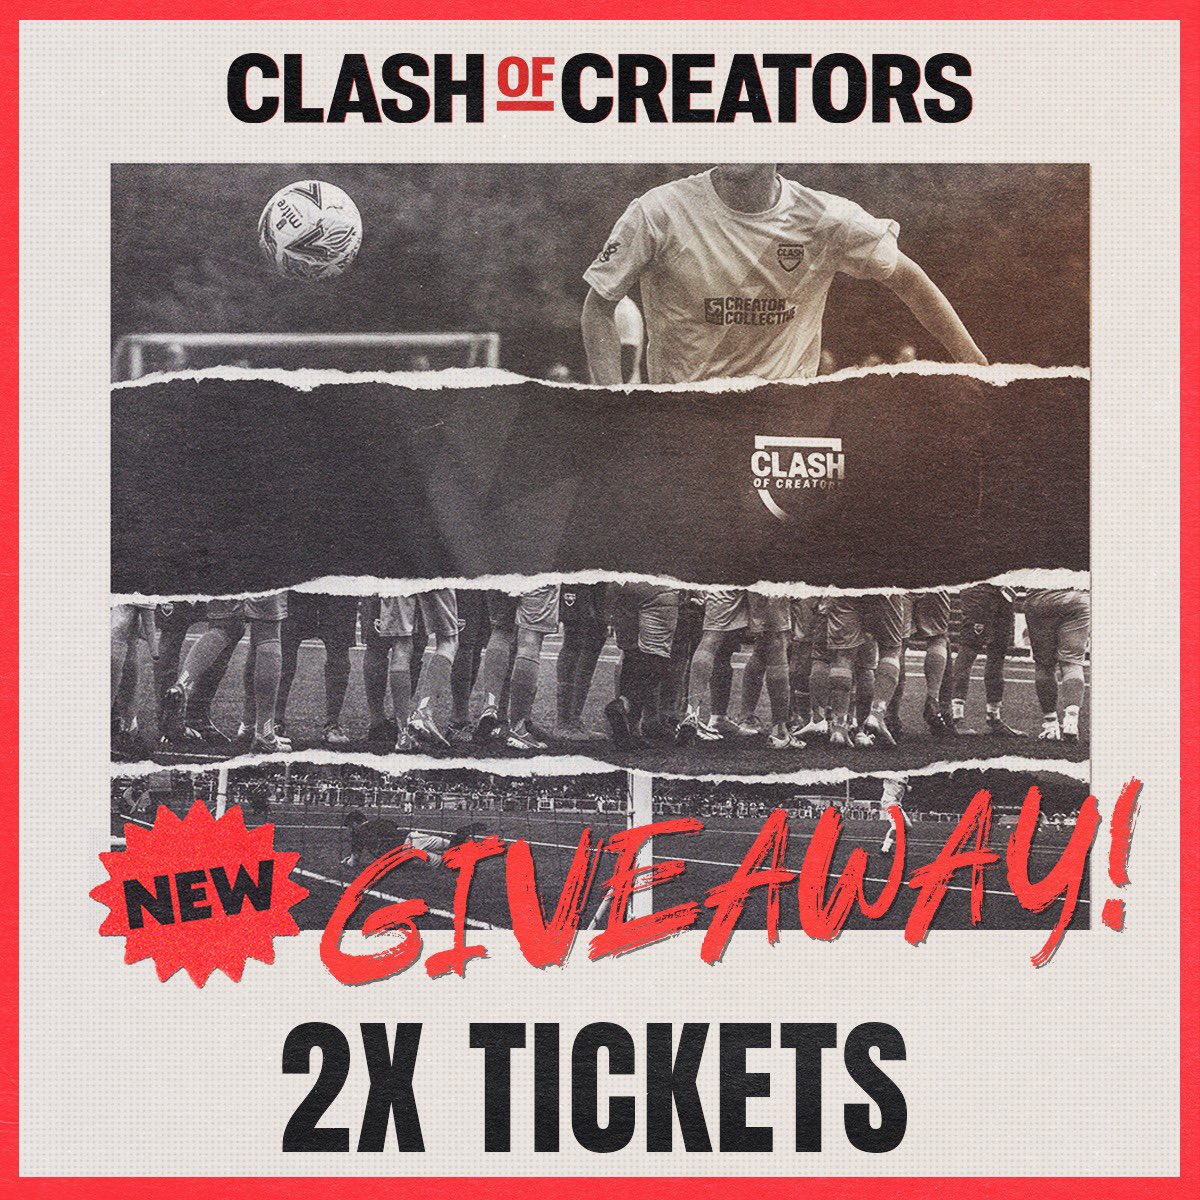 GIVEAWAY!! We’re giving away 2 tickets to Clash of Creators on May 15th at Aveley FC! All you got to do is.. 1. Follow @clash_creators 2. Like and RT this post 3. Tag who you want to come with you Winner is announced Monday at 6PM, good luck!